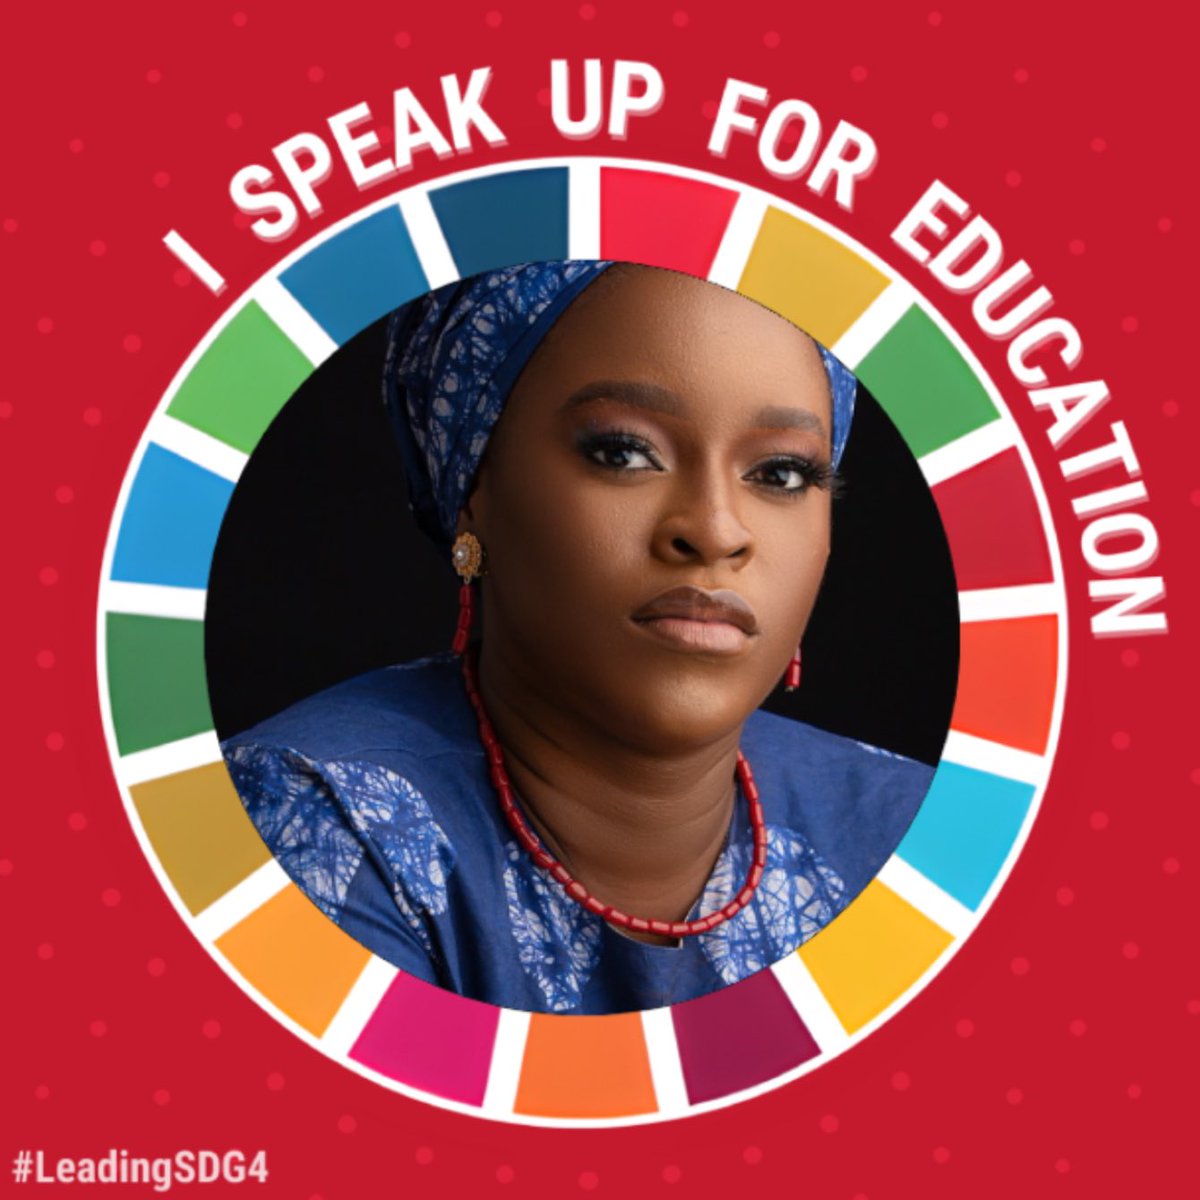 Ahead of this year’s #EducationDay, join us to call on member states to invest in education. 

1⃣ Head to the #EducationDay filter and take a photo
2⃣ Open your social media
3⃣ Post it: tag someone to pass the message & use the #LeadingSDG4 hashtag
app.cheerity.com/1u4B0Ug2I/23